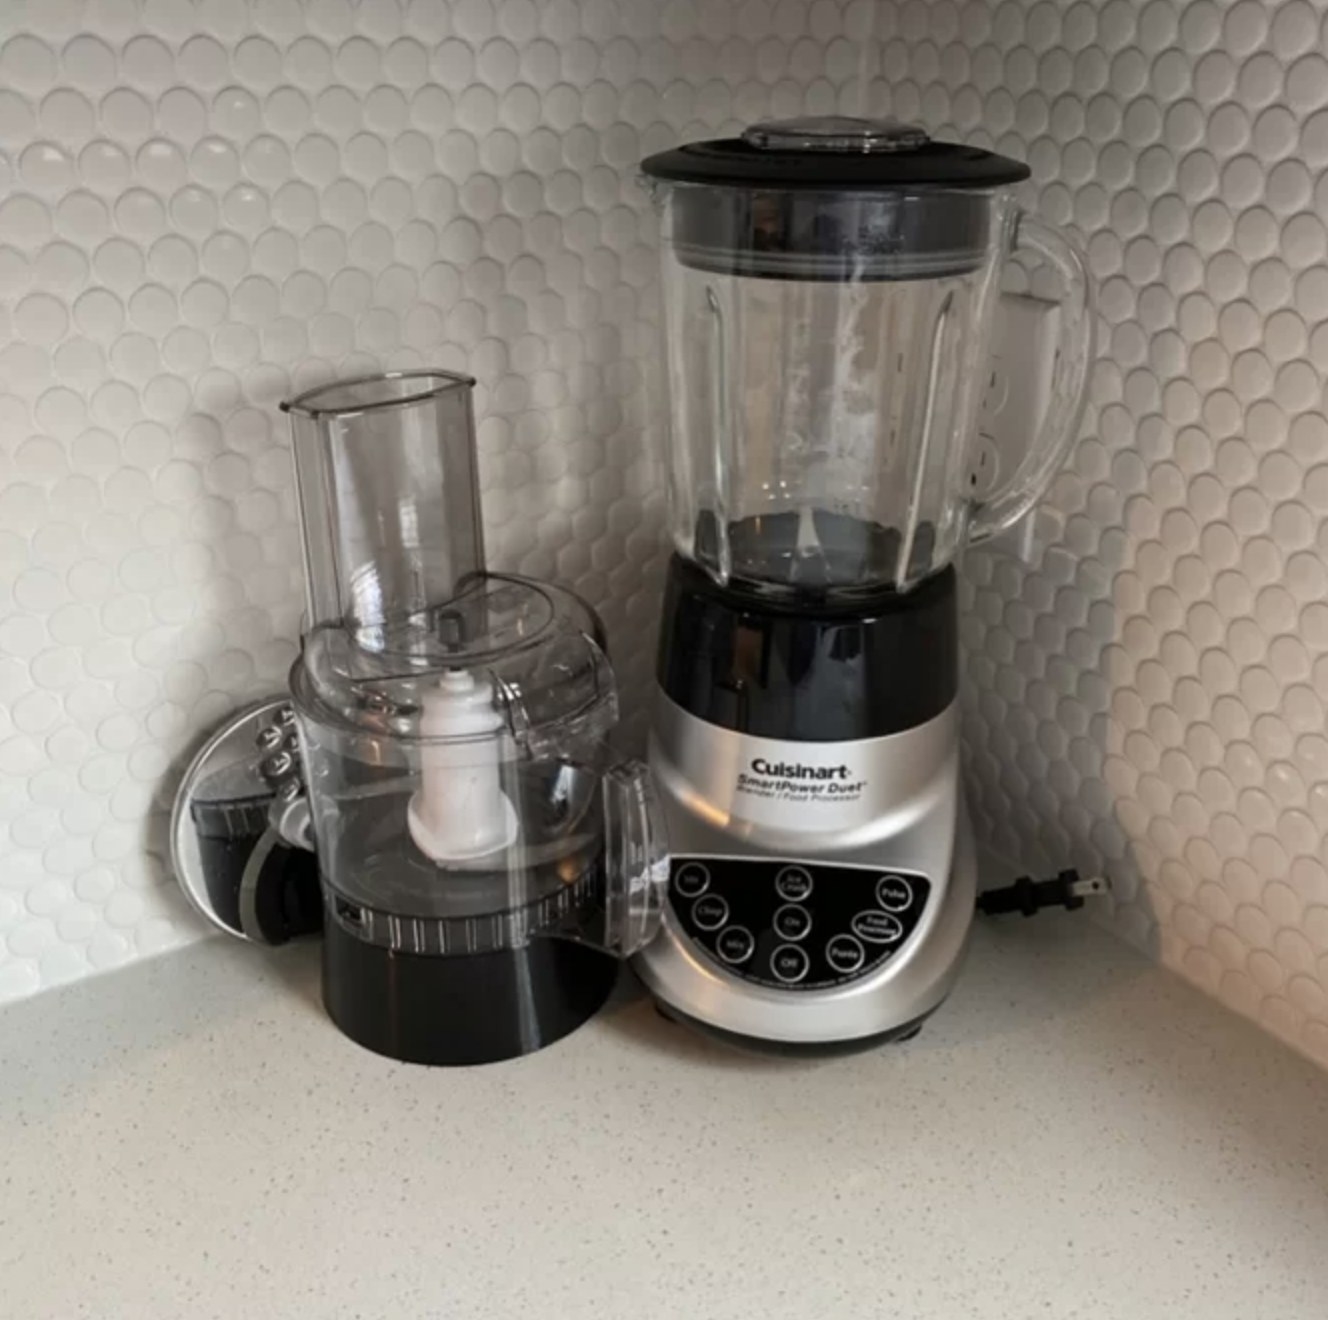 Reviewer&#x27;s photo of the power duet with blender attachment resting on the base and food processor sitting next to it on counter